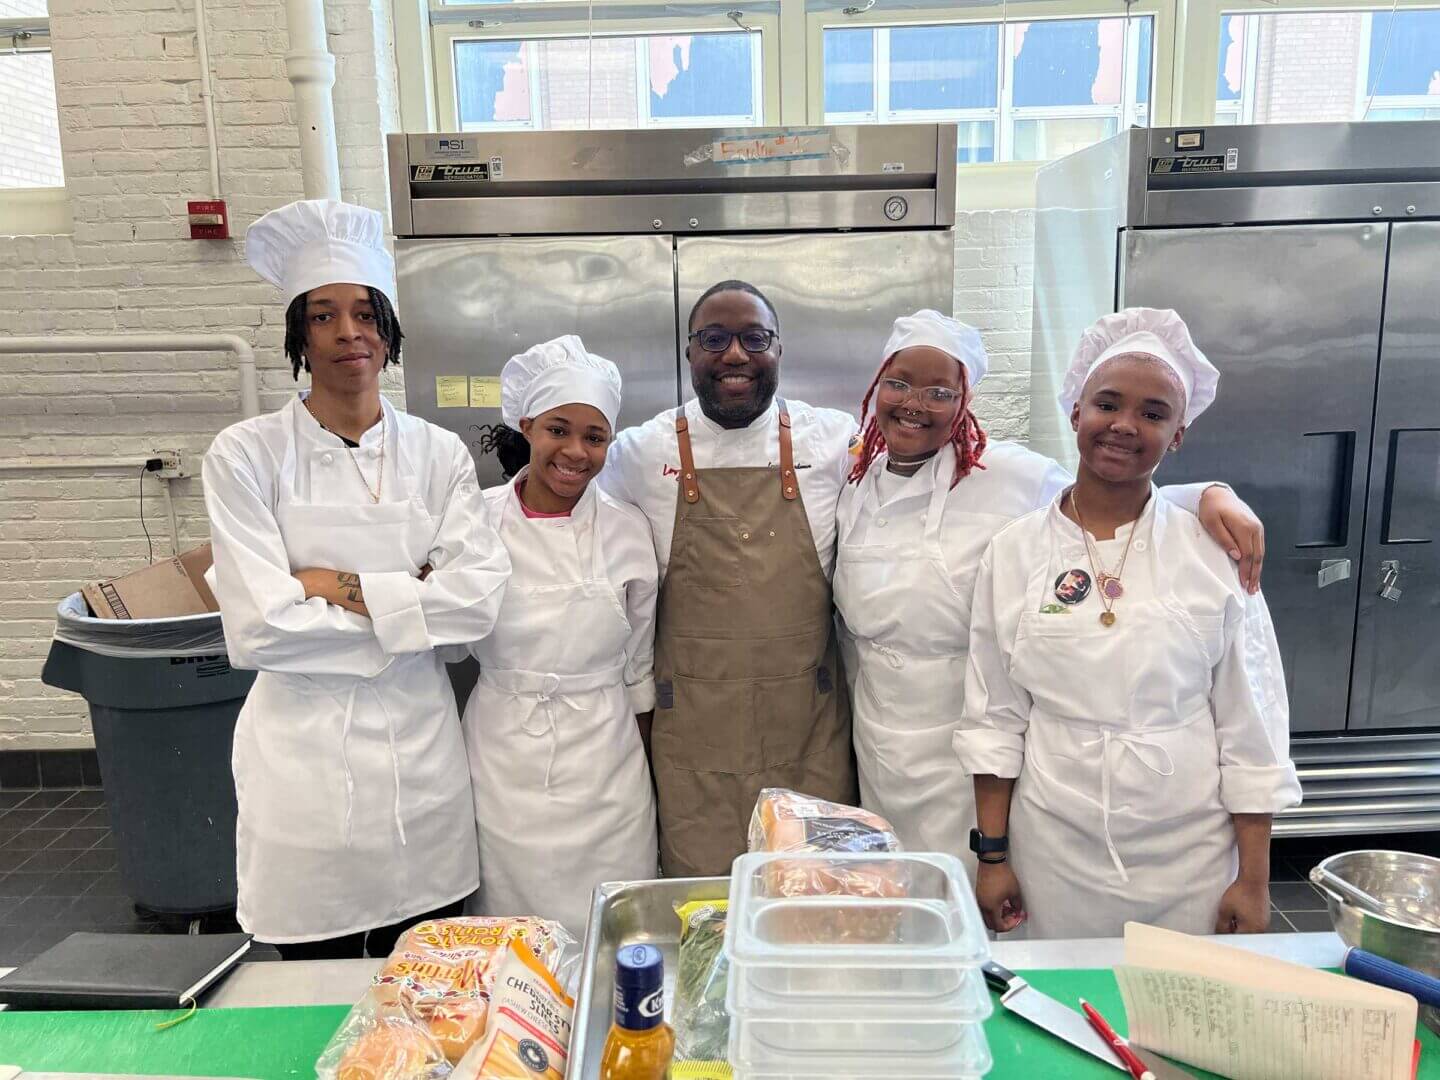 More Than a Culinary Battle: A Day of Mentorship and Learning at Chicago Vocational High School